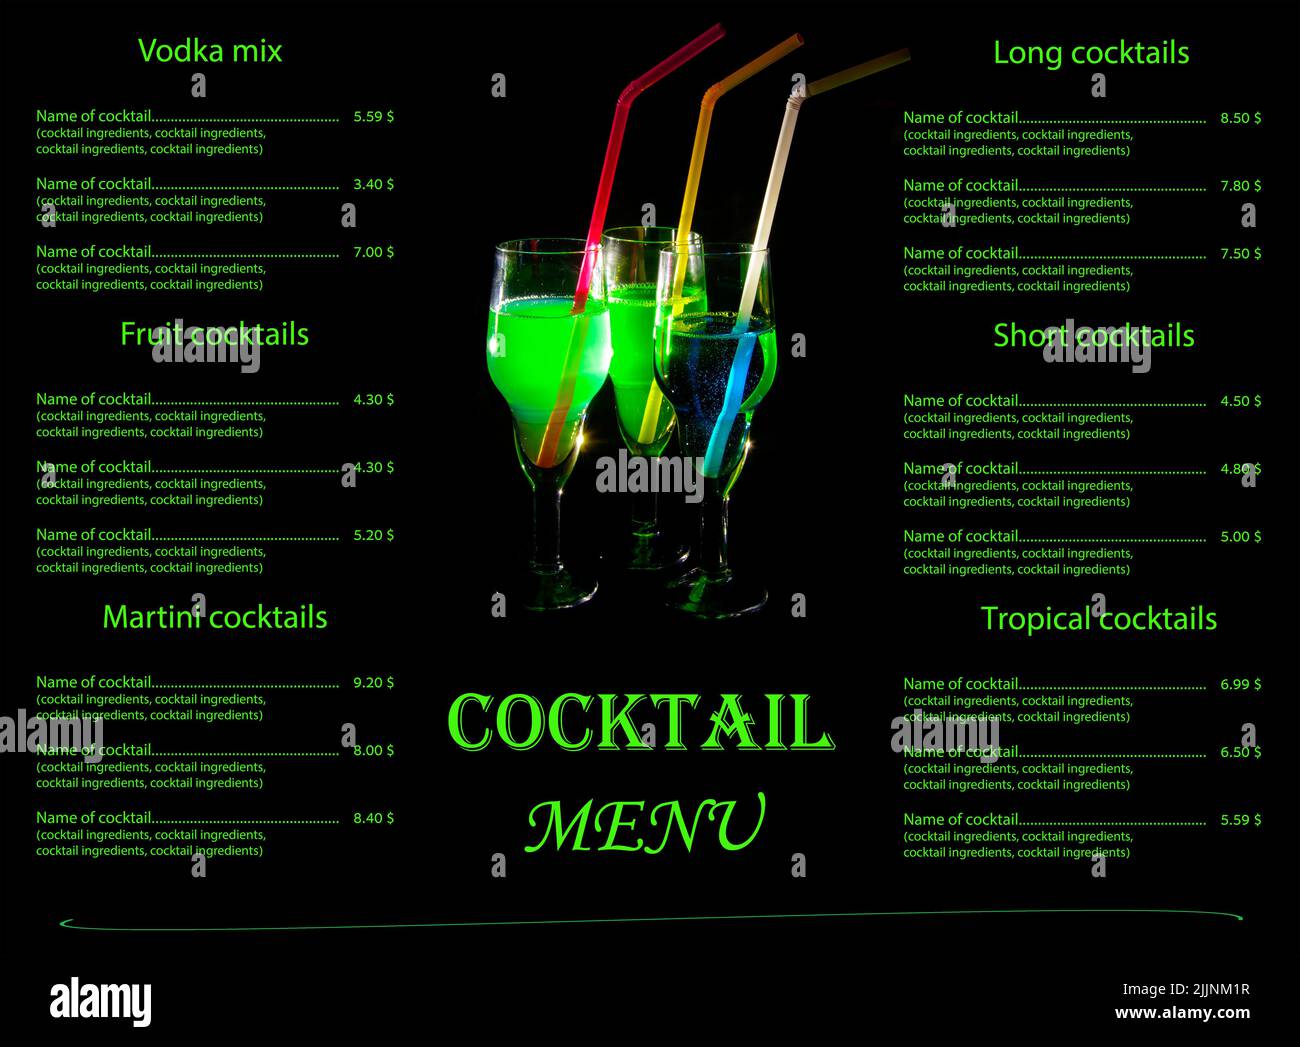 Cocktail menu concept for your bar or restaurant on a black background with a green text and three small glasses with a straws. Menu design. Stock Photo